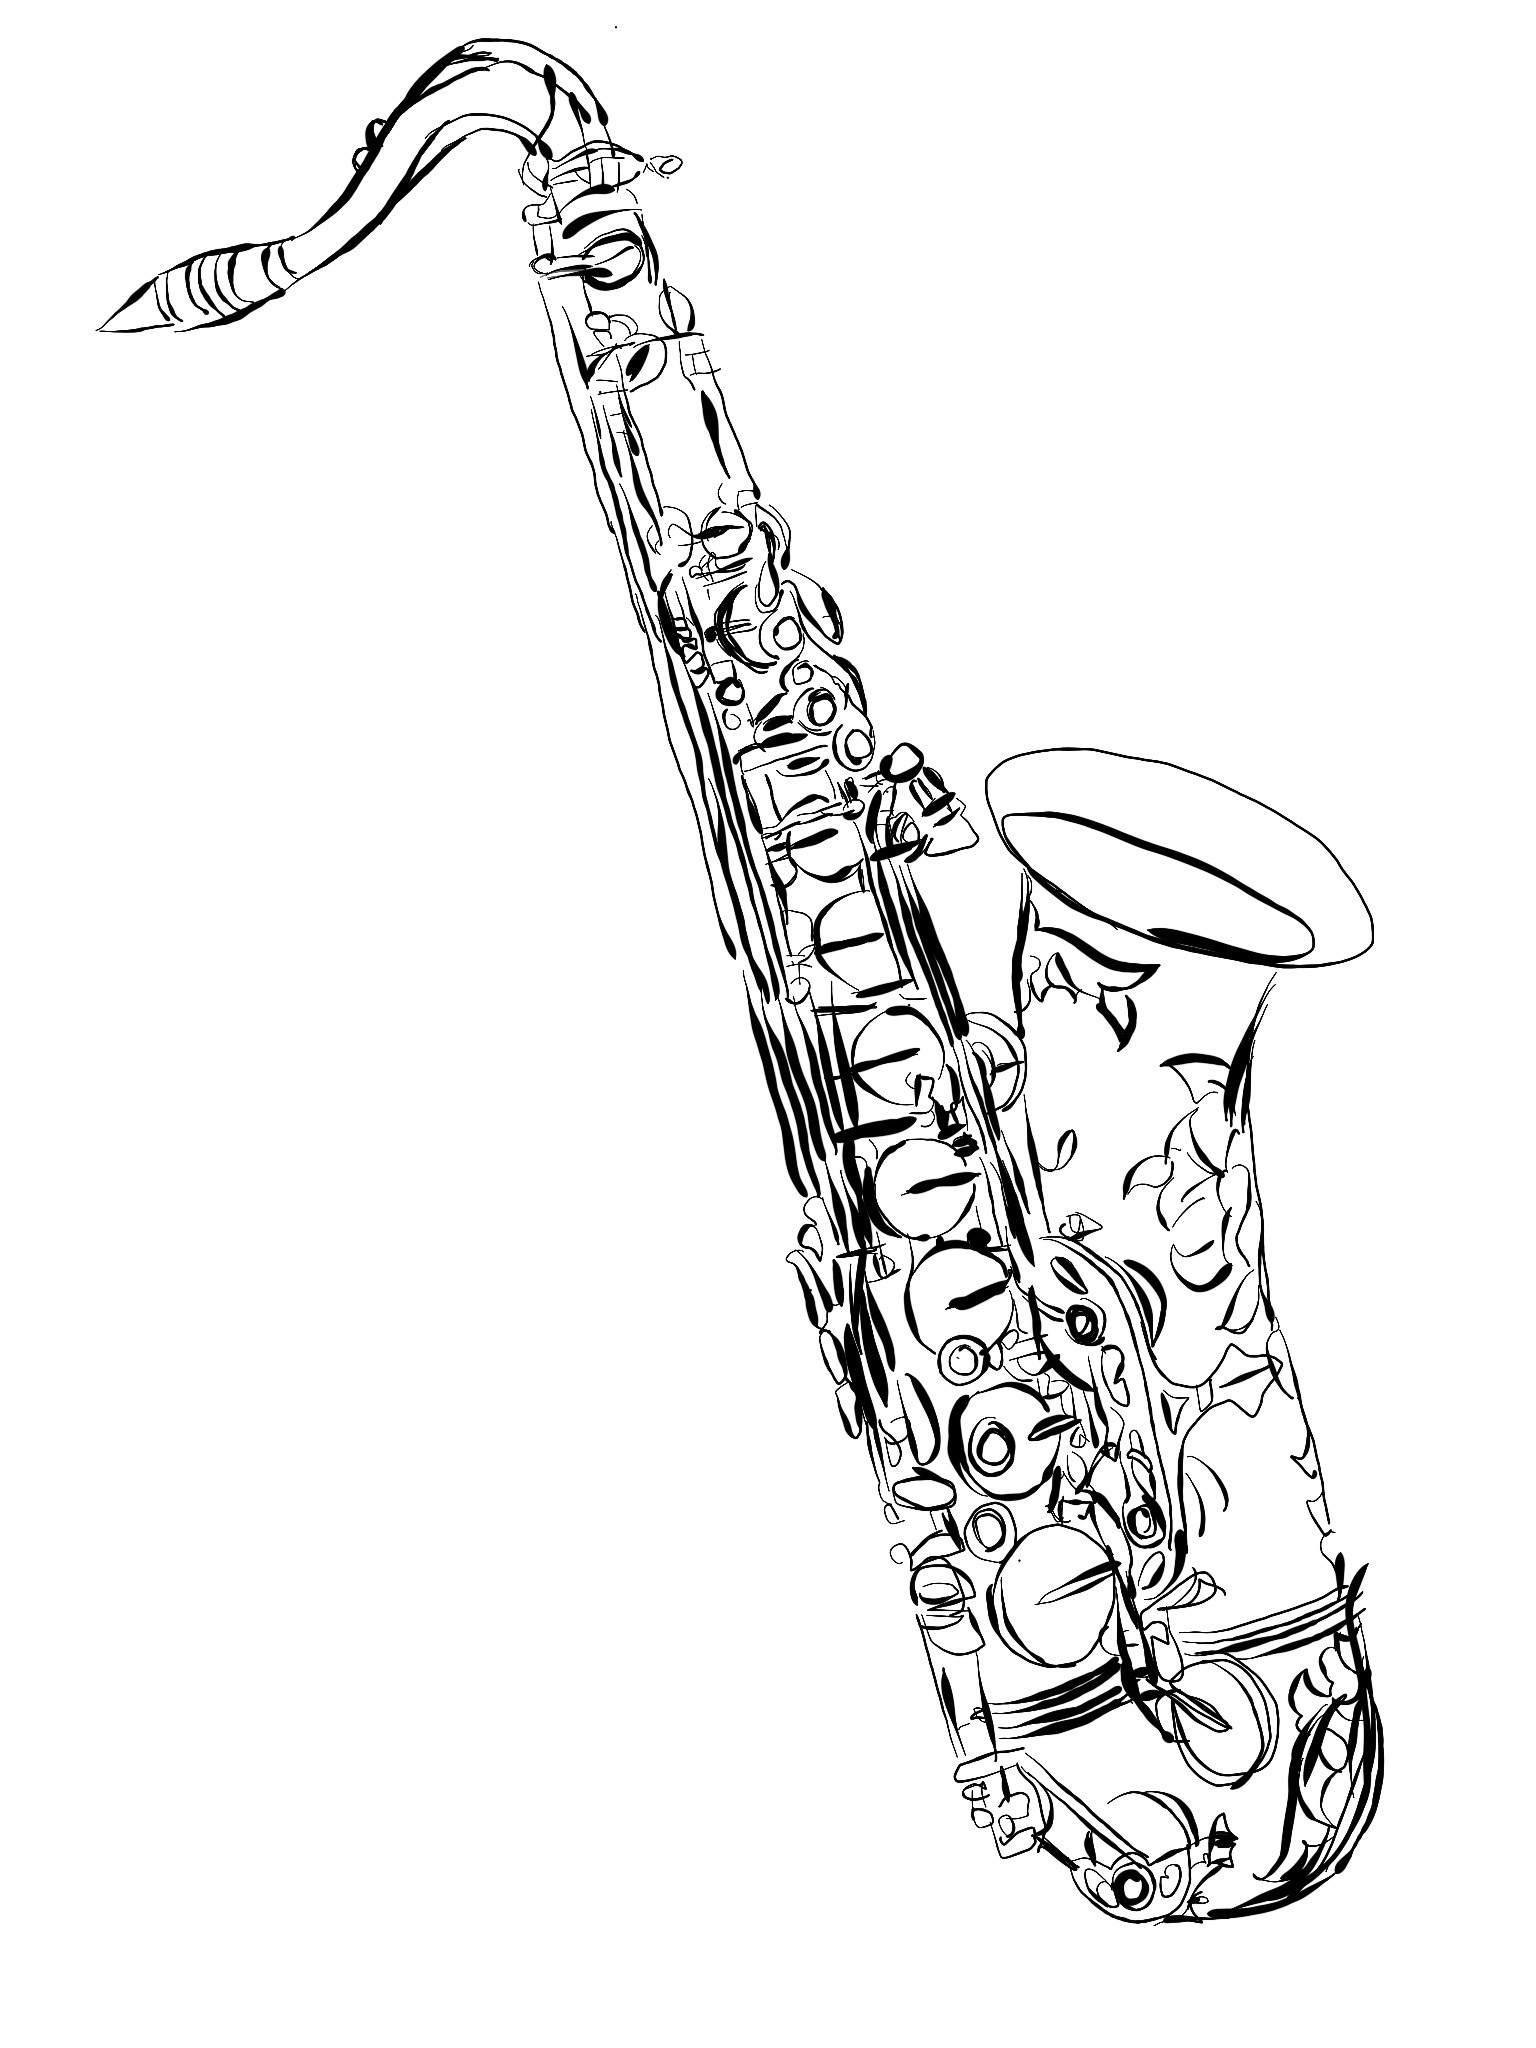 The best free Sax drawing images. Download from 83 free drawings of Sax